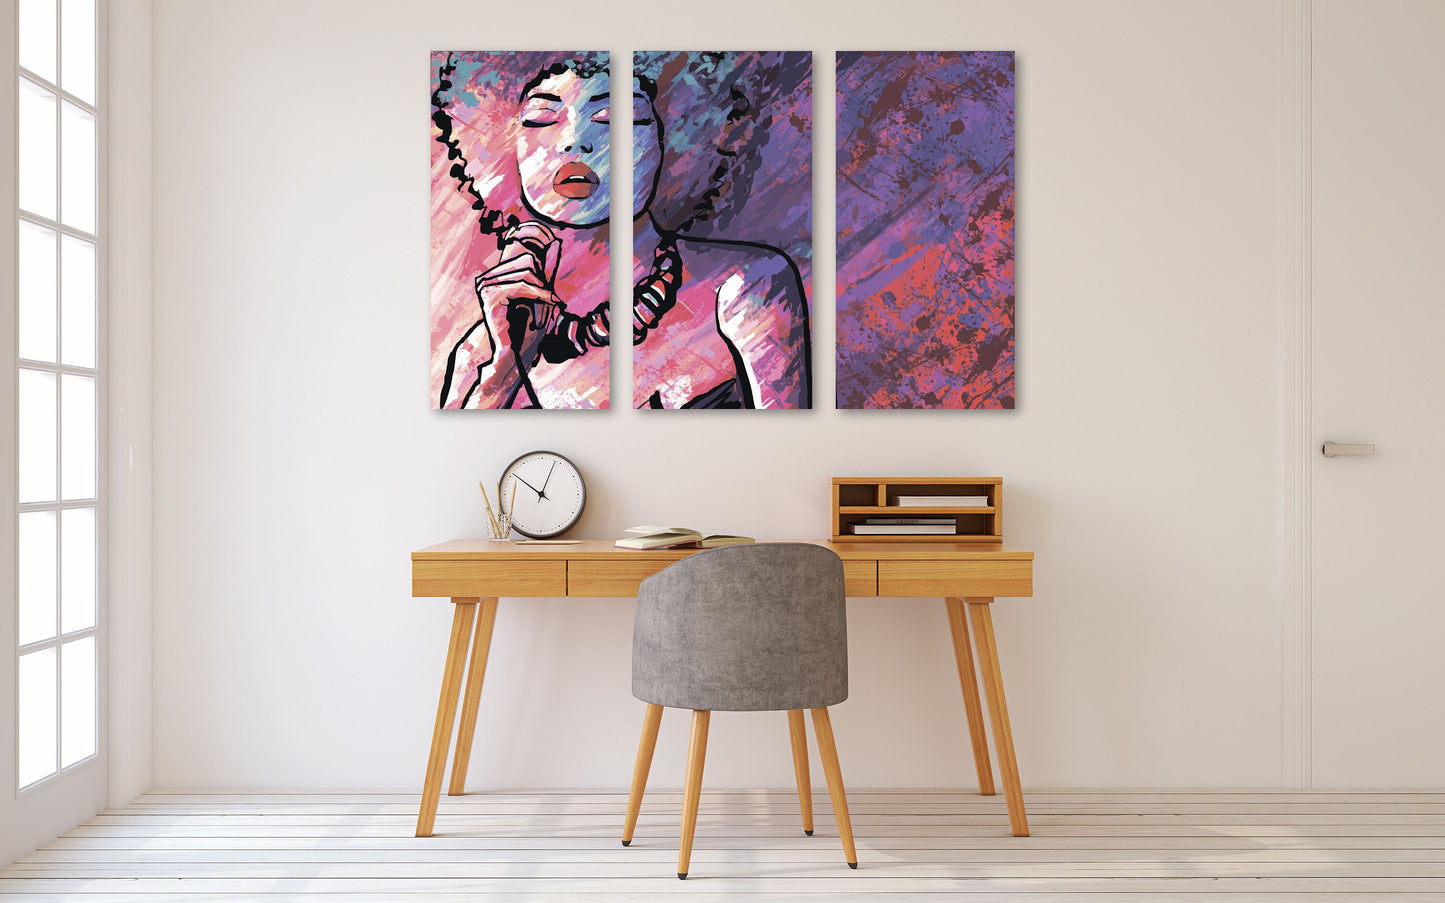 Trendy Black Afro woman canvas wall art  African american bright wall art multi panel extra large canvas art painting